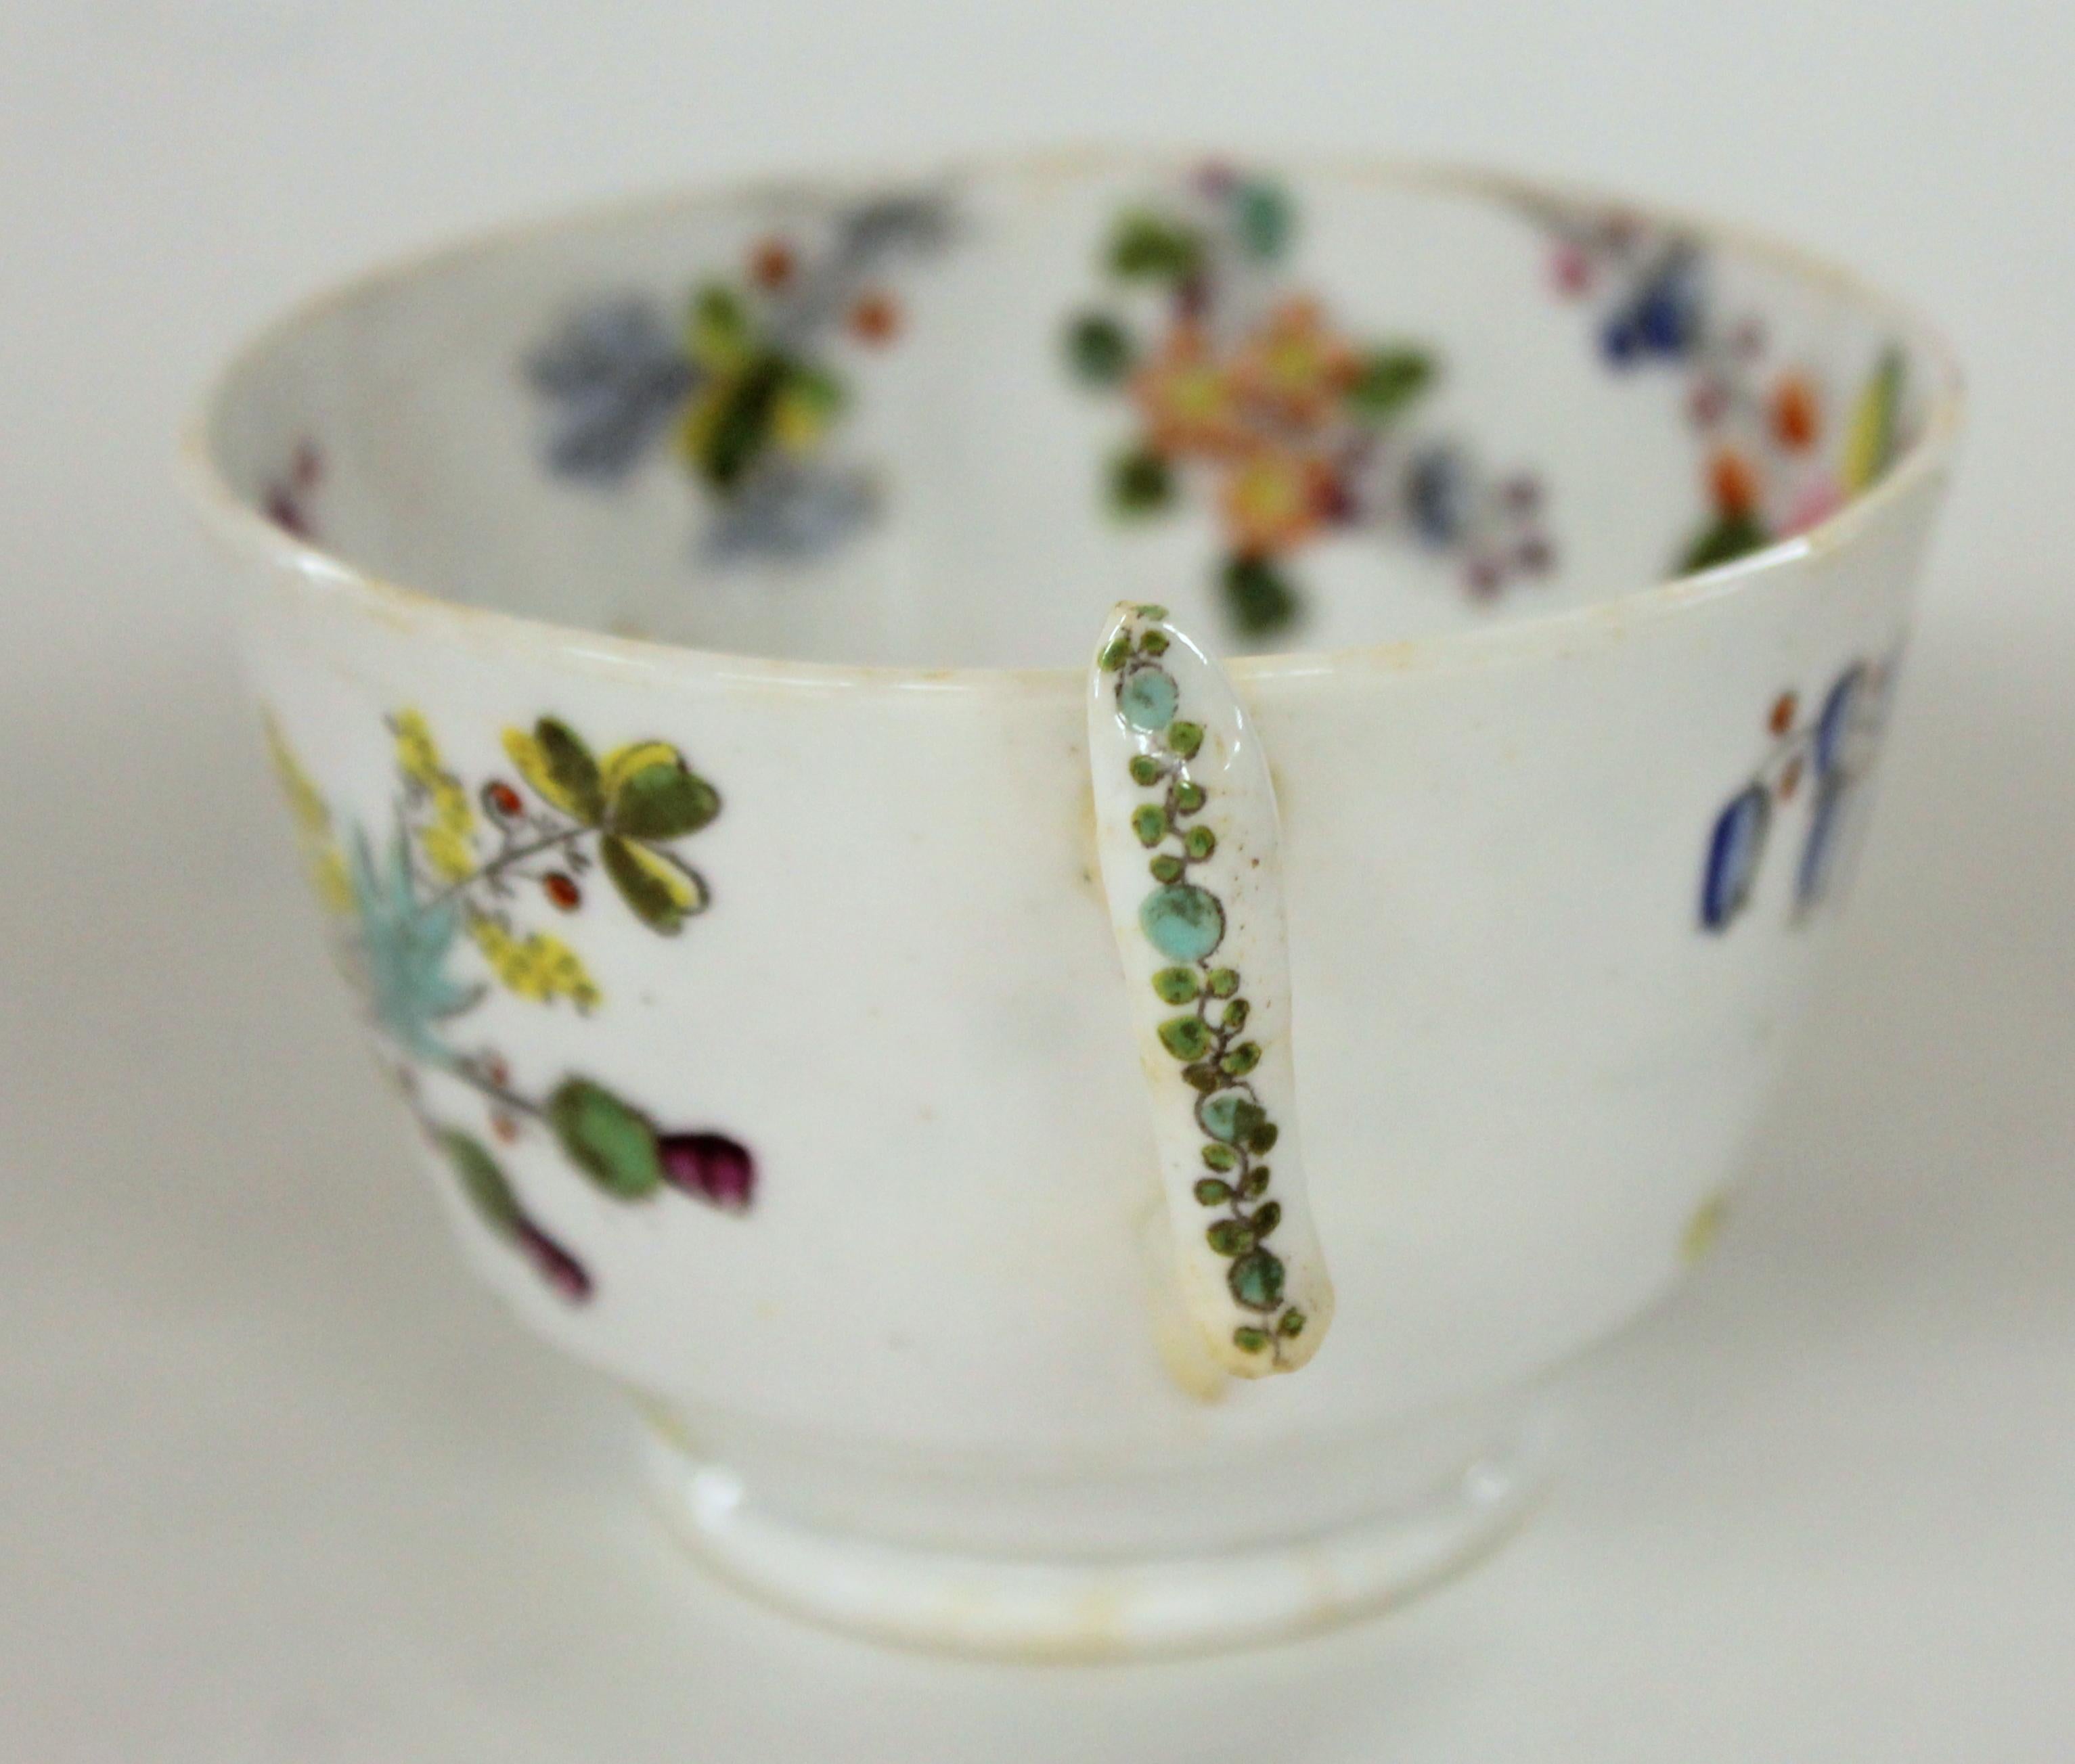 Hand-Painted English Early 19th Century New Hall Porcelain Floral Decor Cup and Saucer For Sale